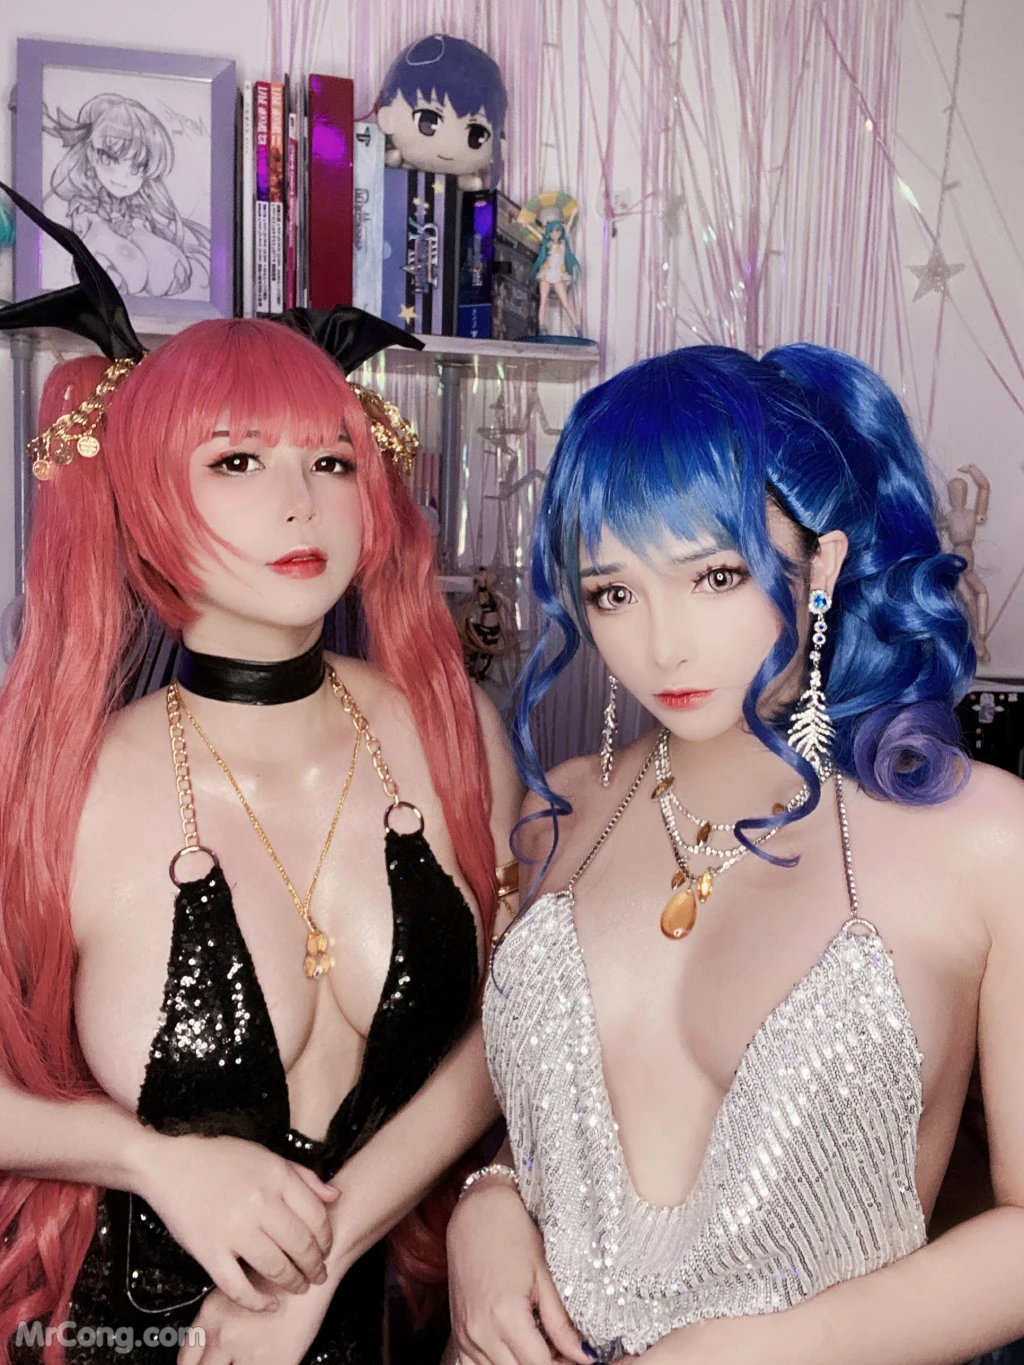 Coser@Mimichan: St. Louis and Honolulu (49 photos)